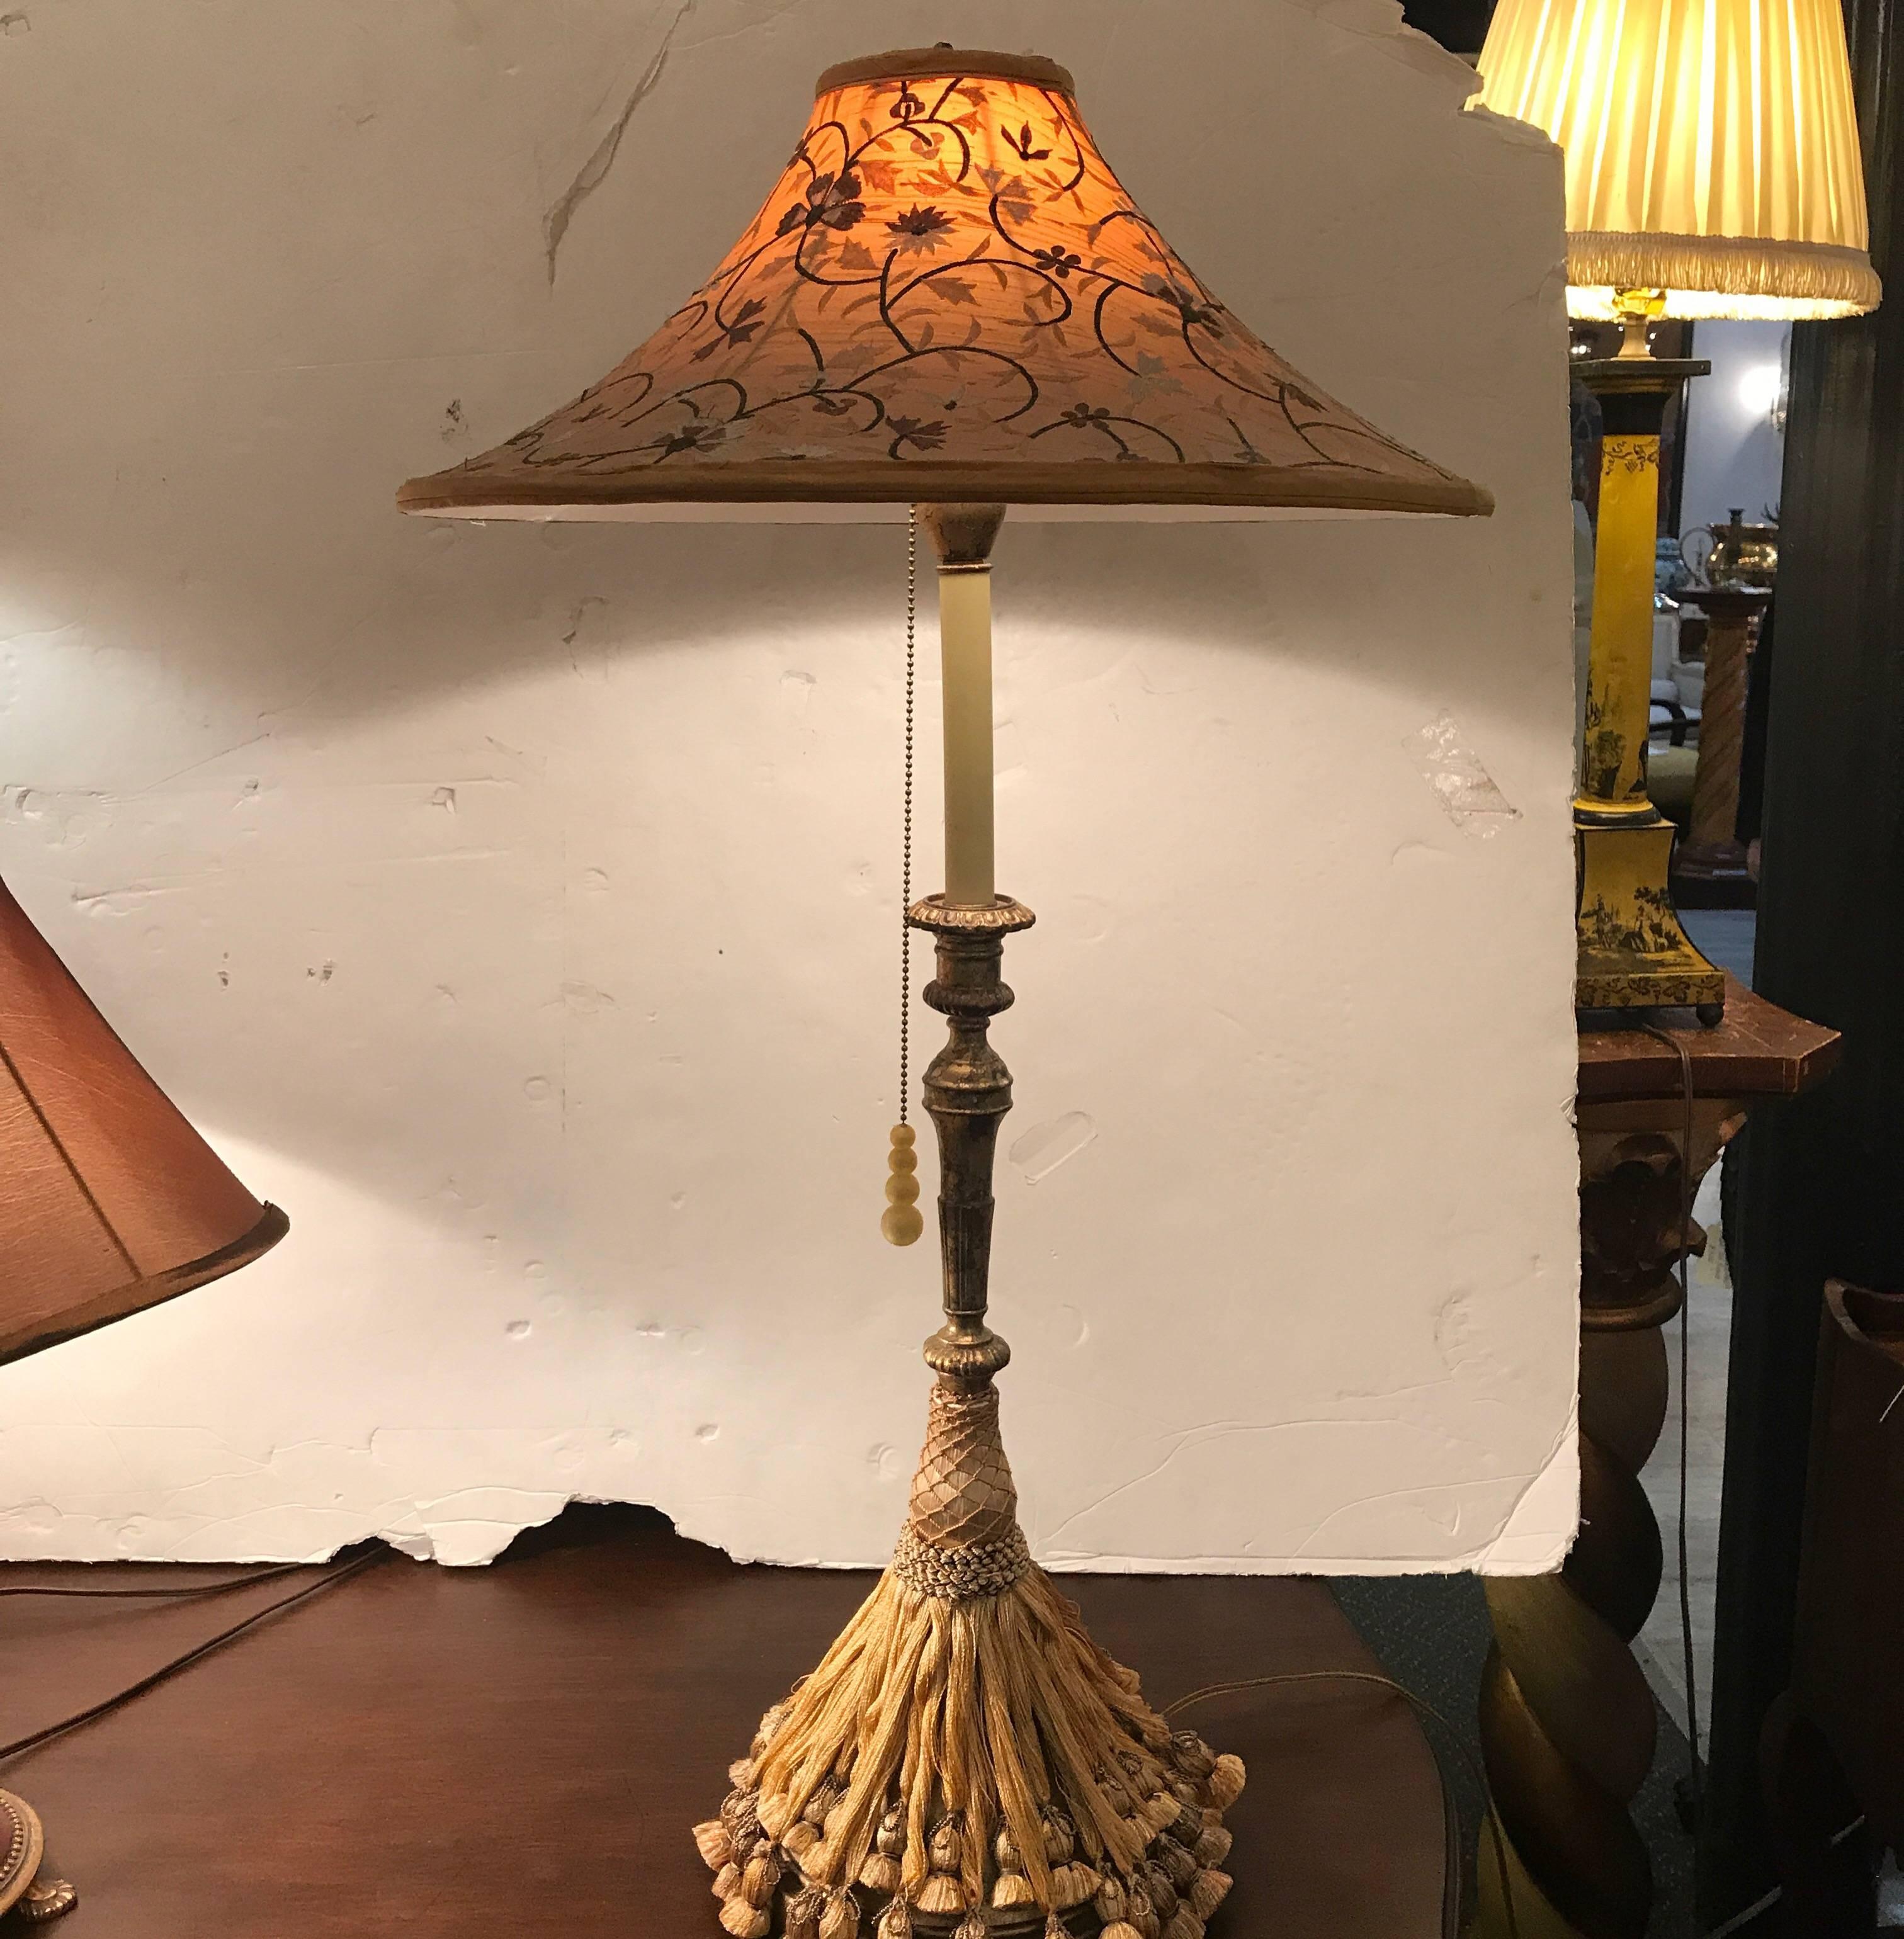 A pair of extravagant lamps with embroidered coolie shades designed by Traynor for Frederick Cooper. The tall lamps in a gilt metal candlestick form. The bases are draped with layers of tassels for a very unique look. The dramatic shades with all